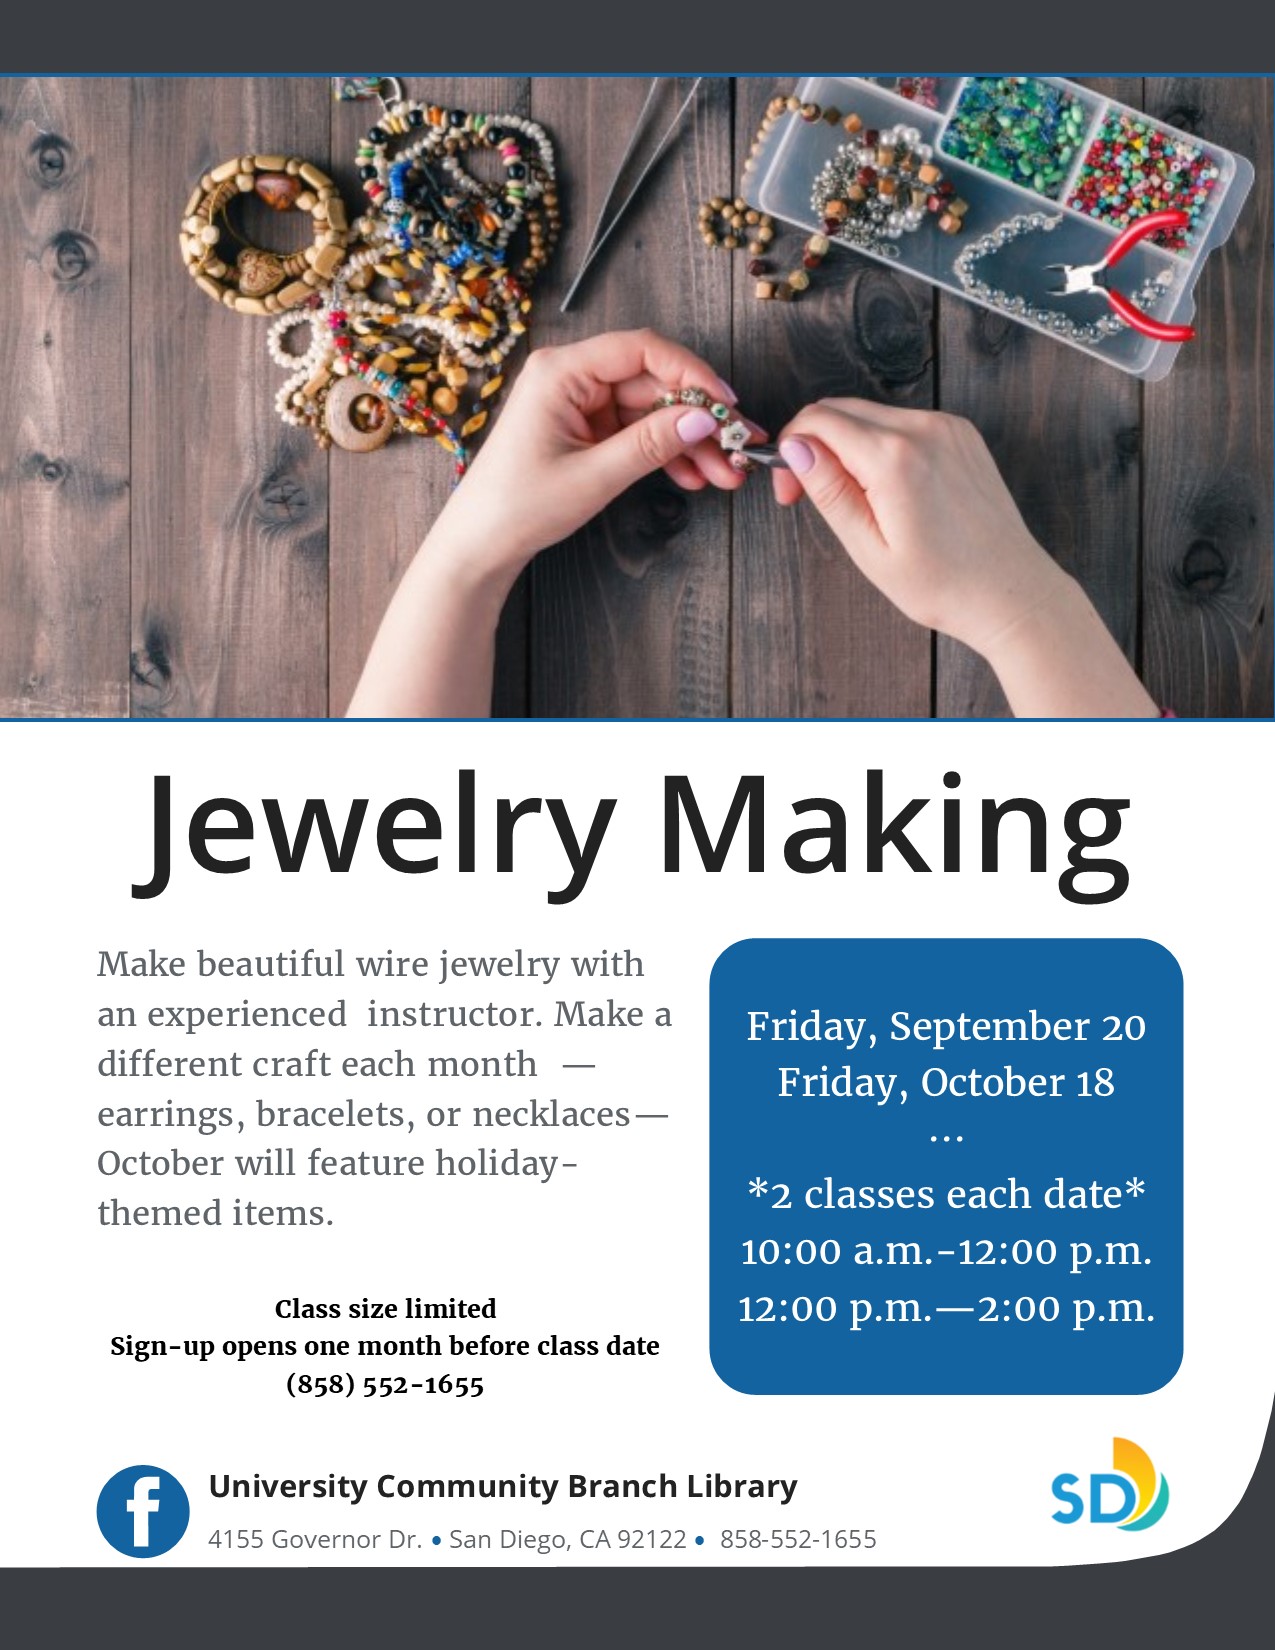 Jewelry making class. No fee. All supplies provided. Call the library to sign up - 858-552-1655.